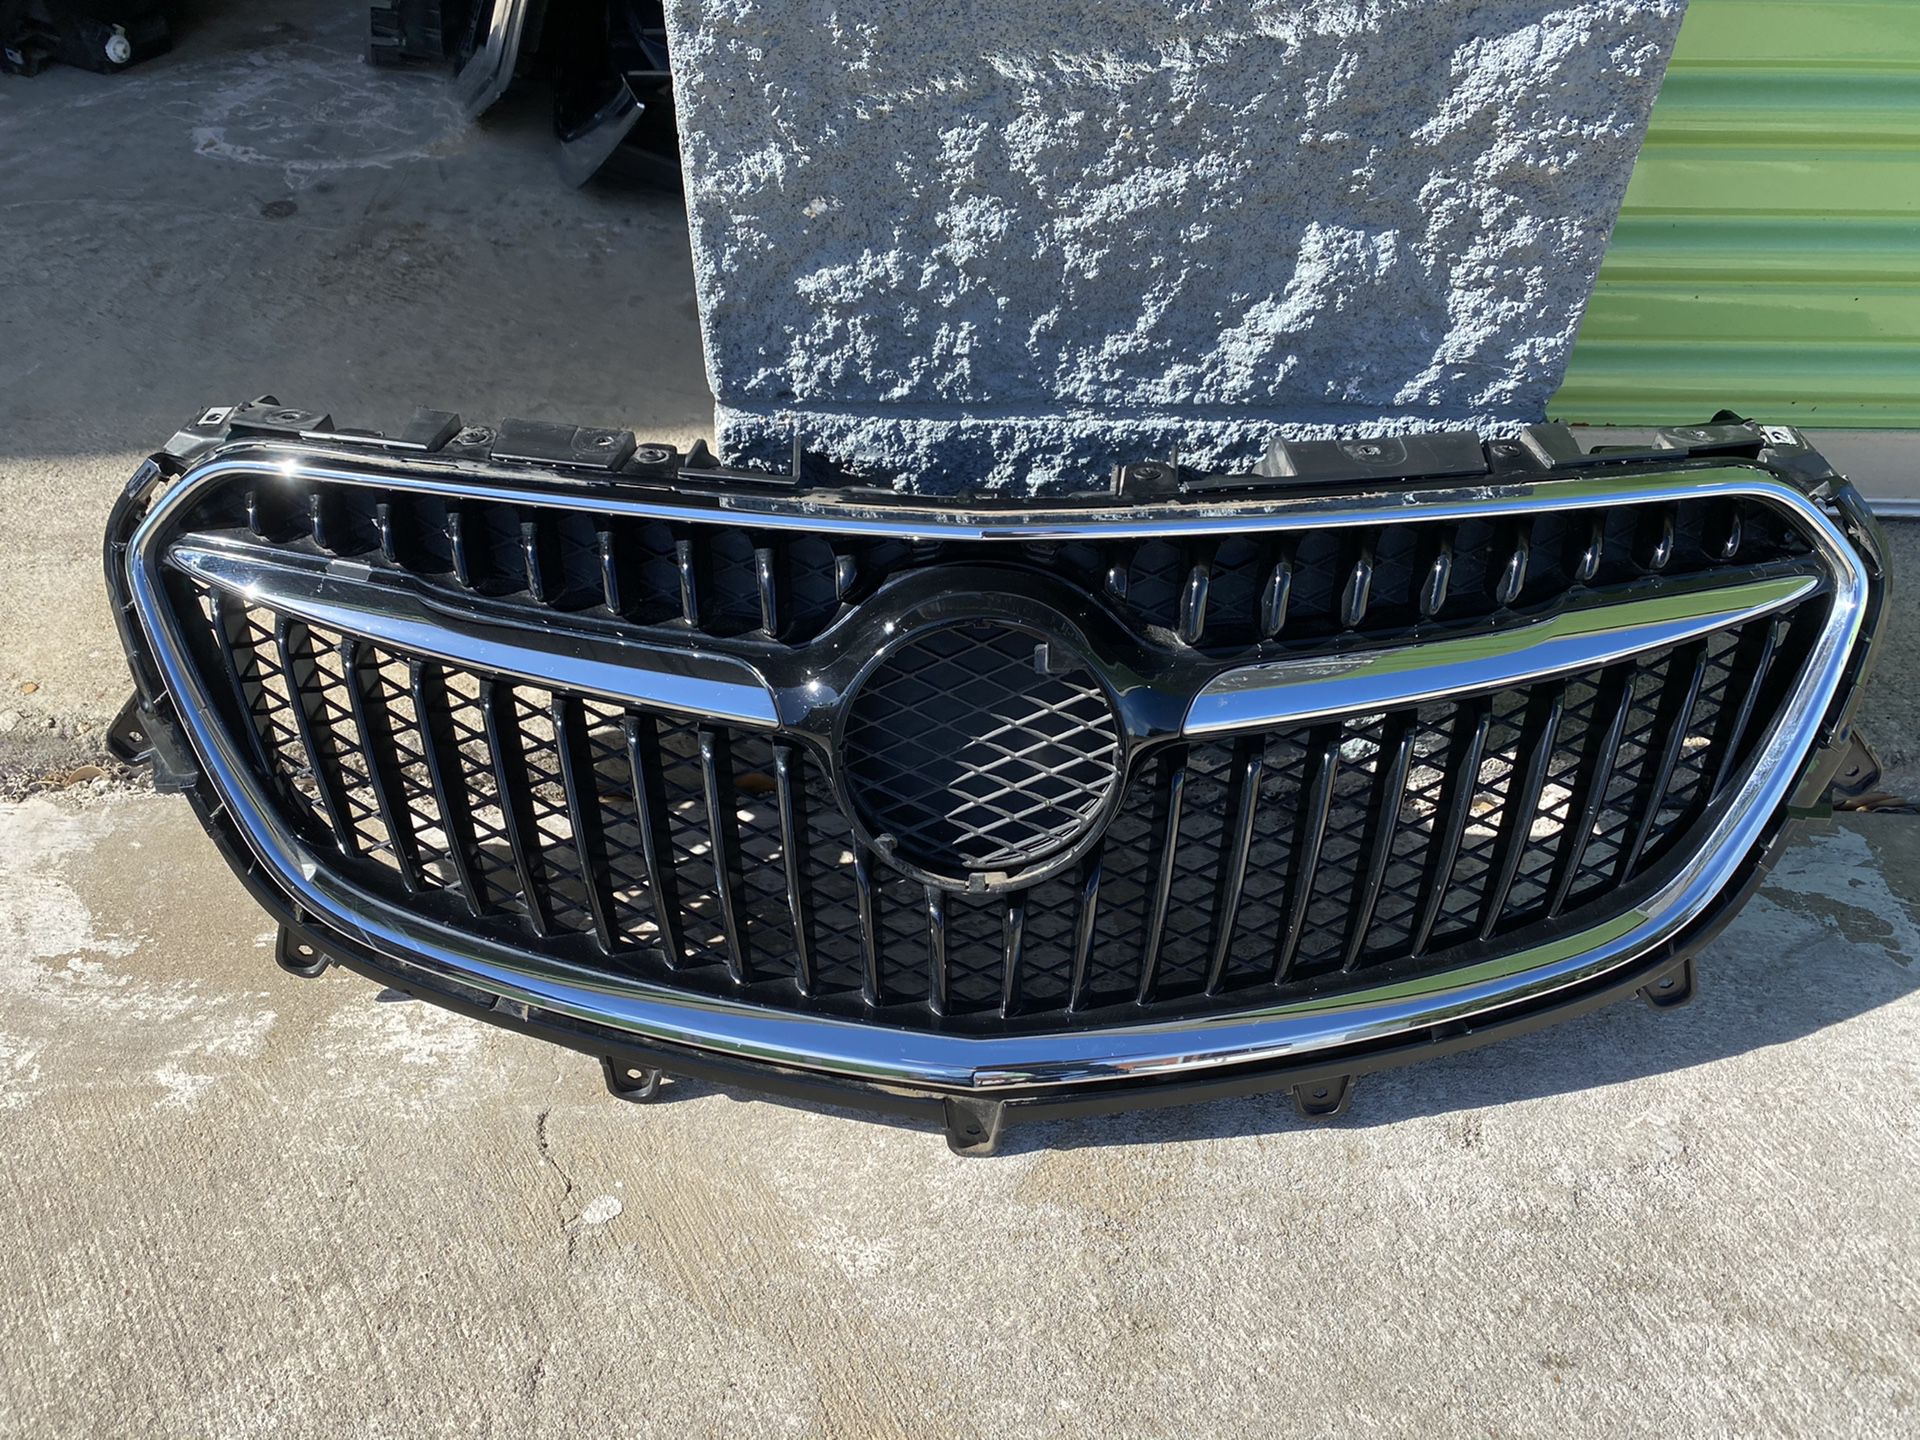 2018 BUICK ENCORE UPPER GRILLE PAINTING